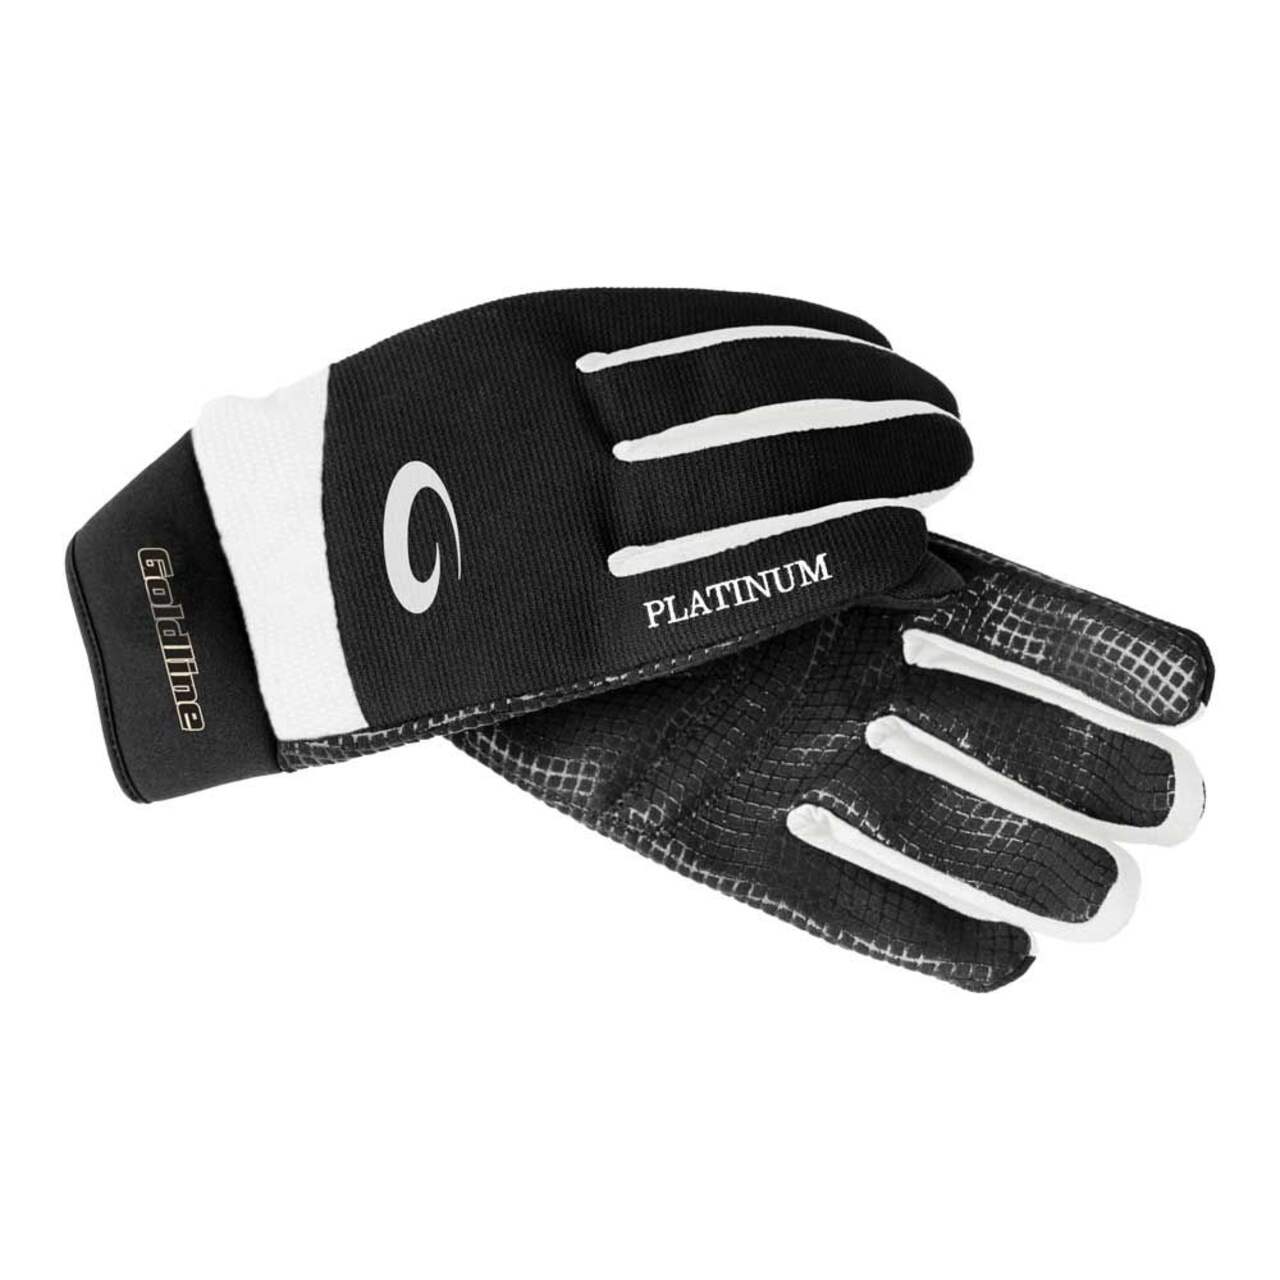 Goldline Platinum Unisex Men's/Women's Insulated Curling Gloves w/ Silicone  Palm Grips, Assorted Sizes